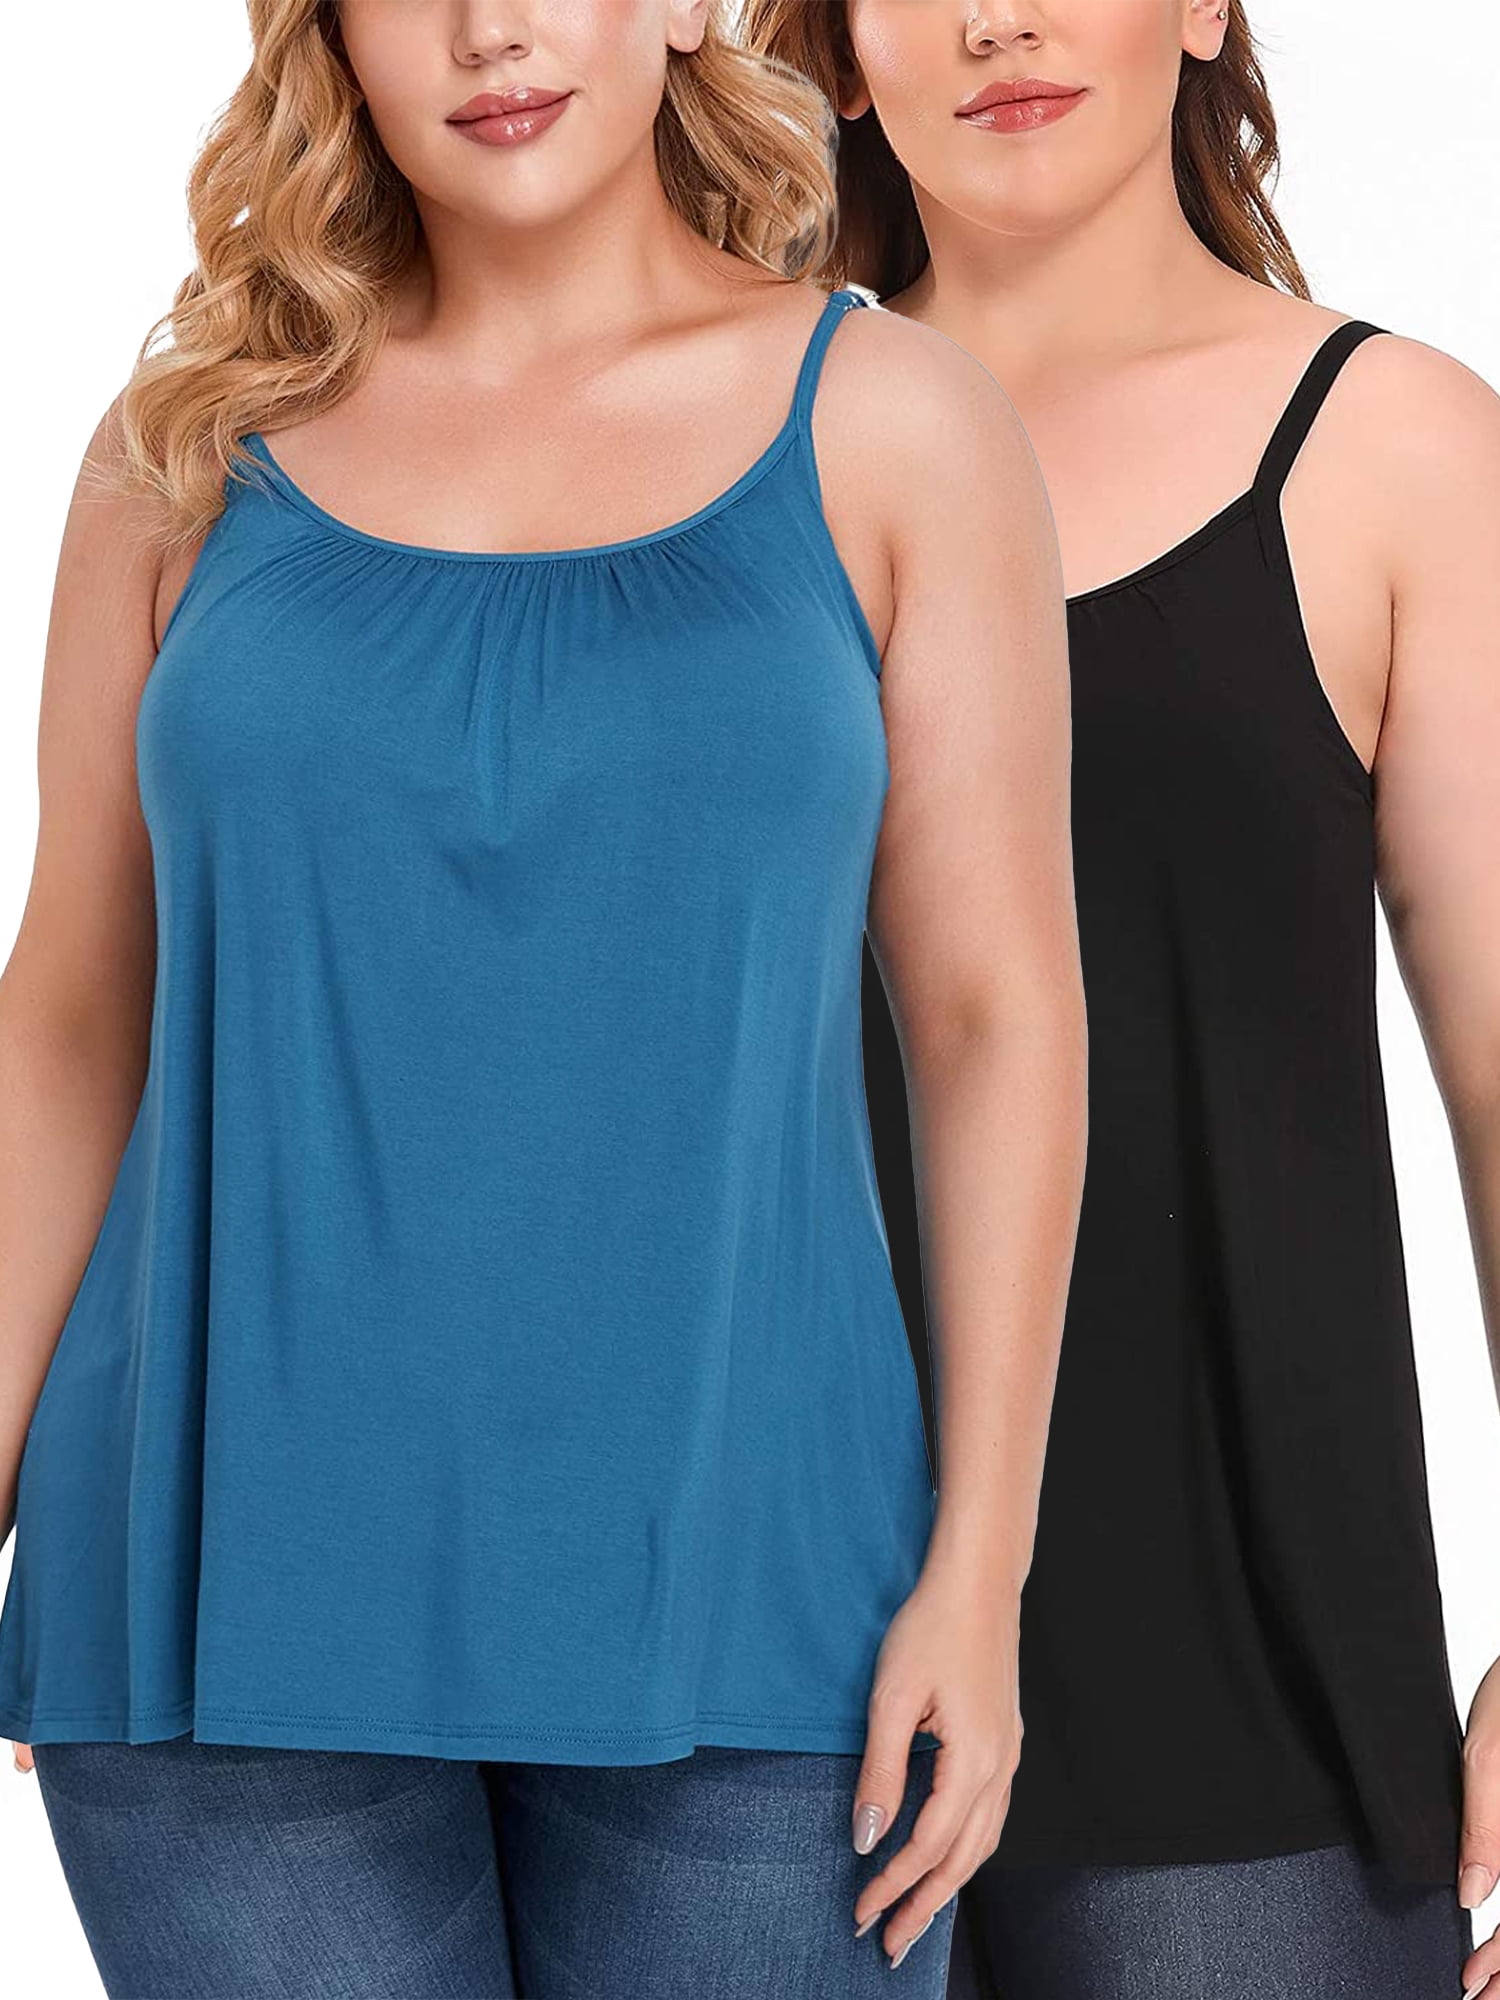 FITVALEN Women's Camisole with Built in Bra Plus Size Casual Loose